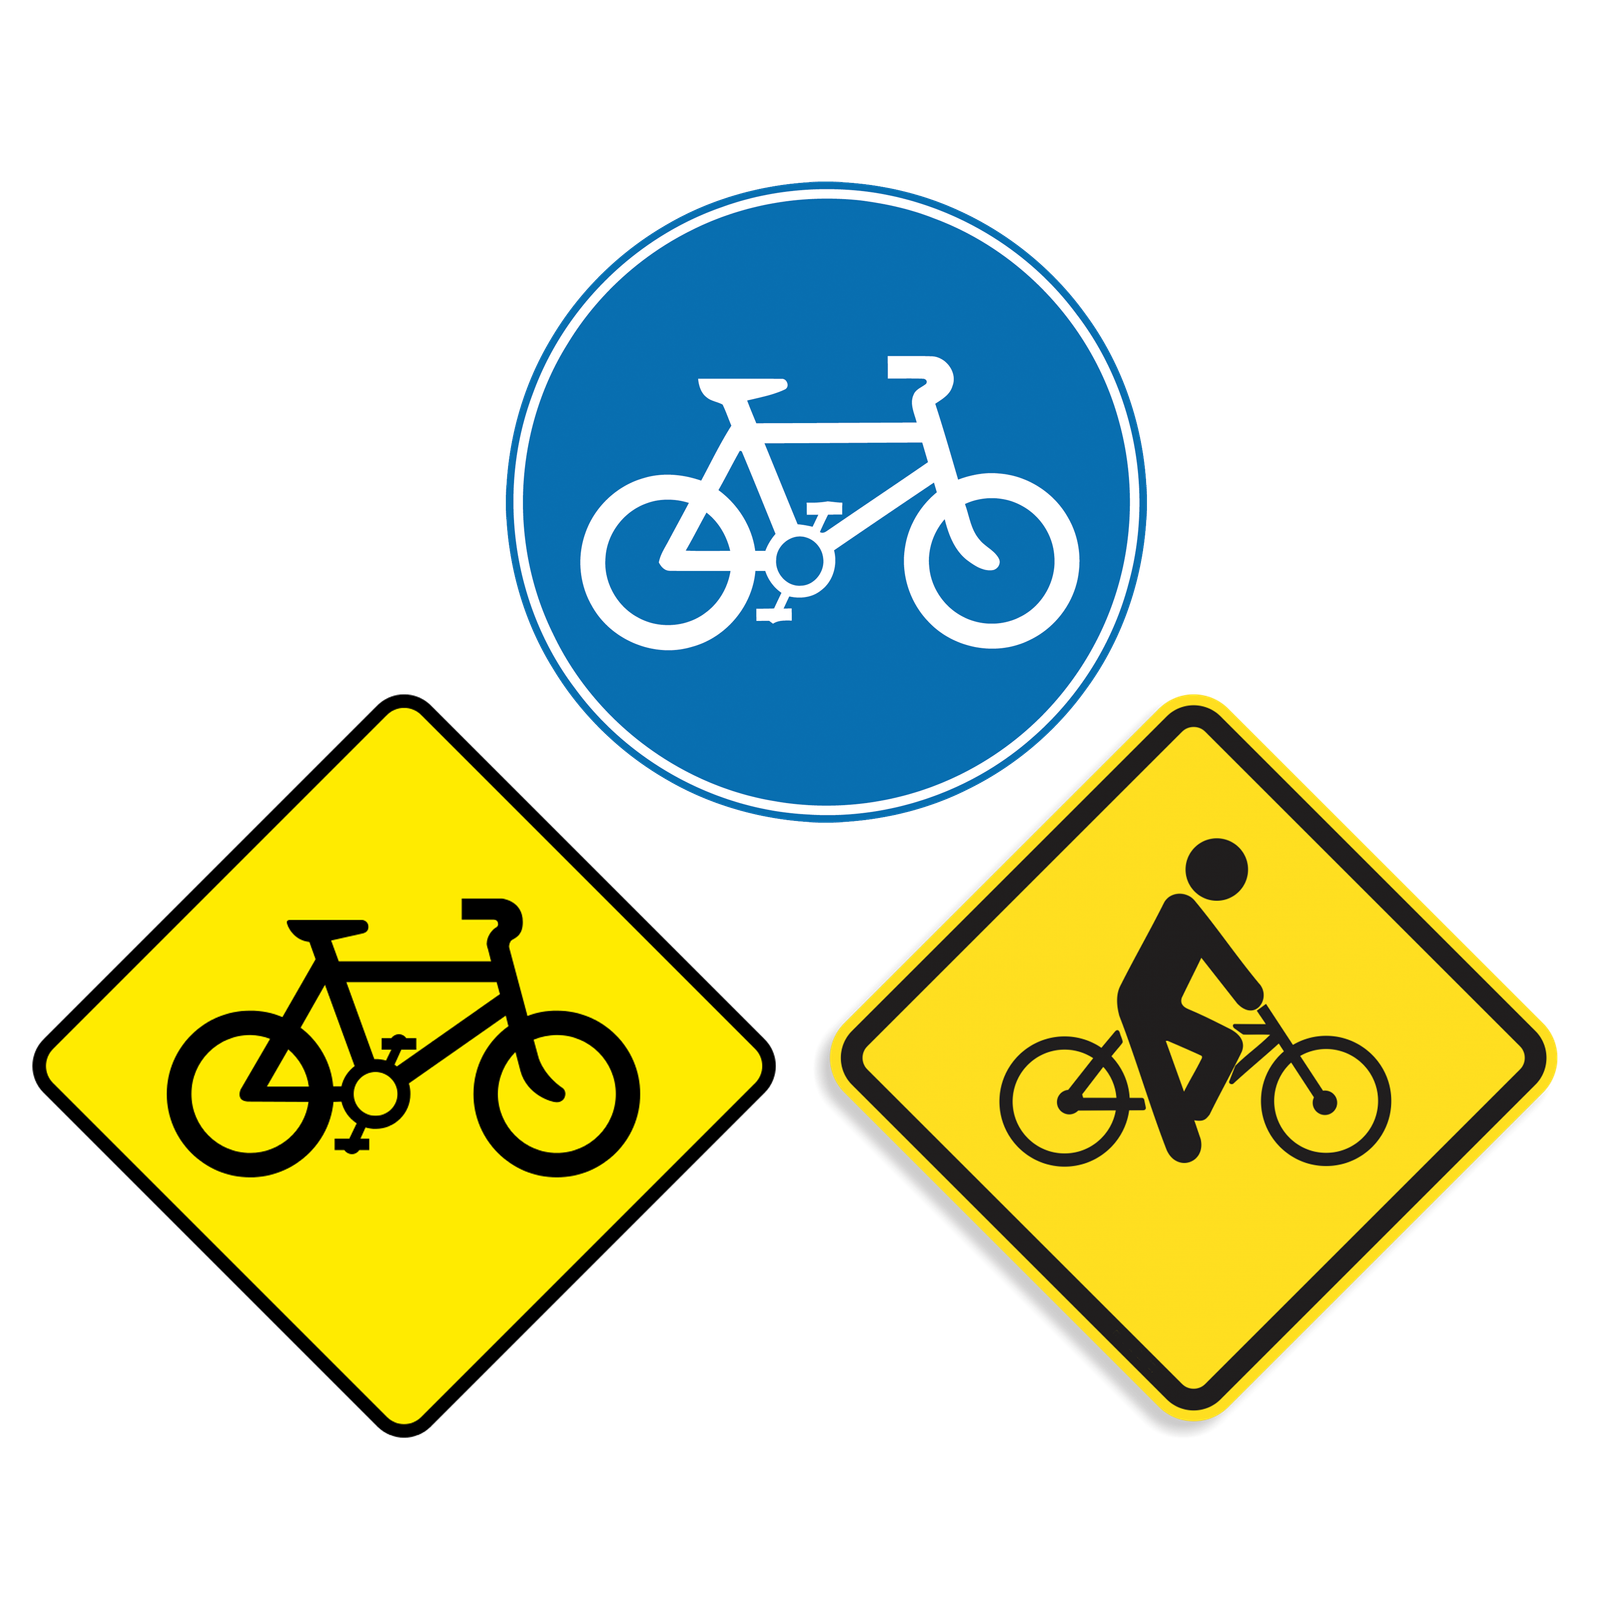 Bicycle traffic sign warning bicycle signal riding background vector illustration